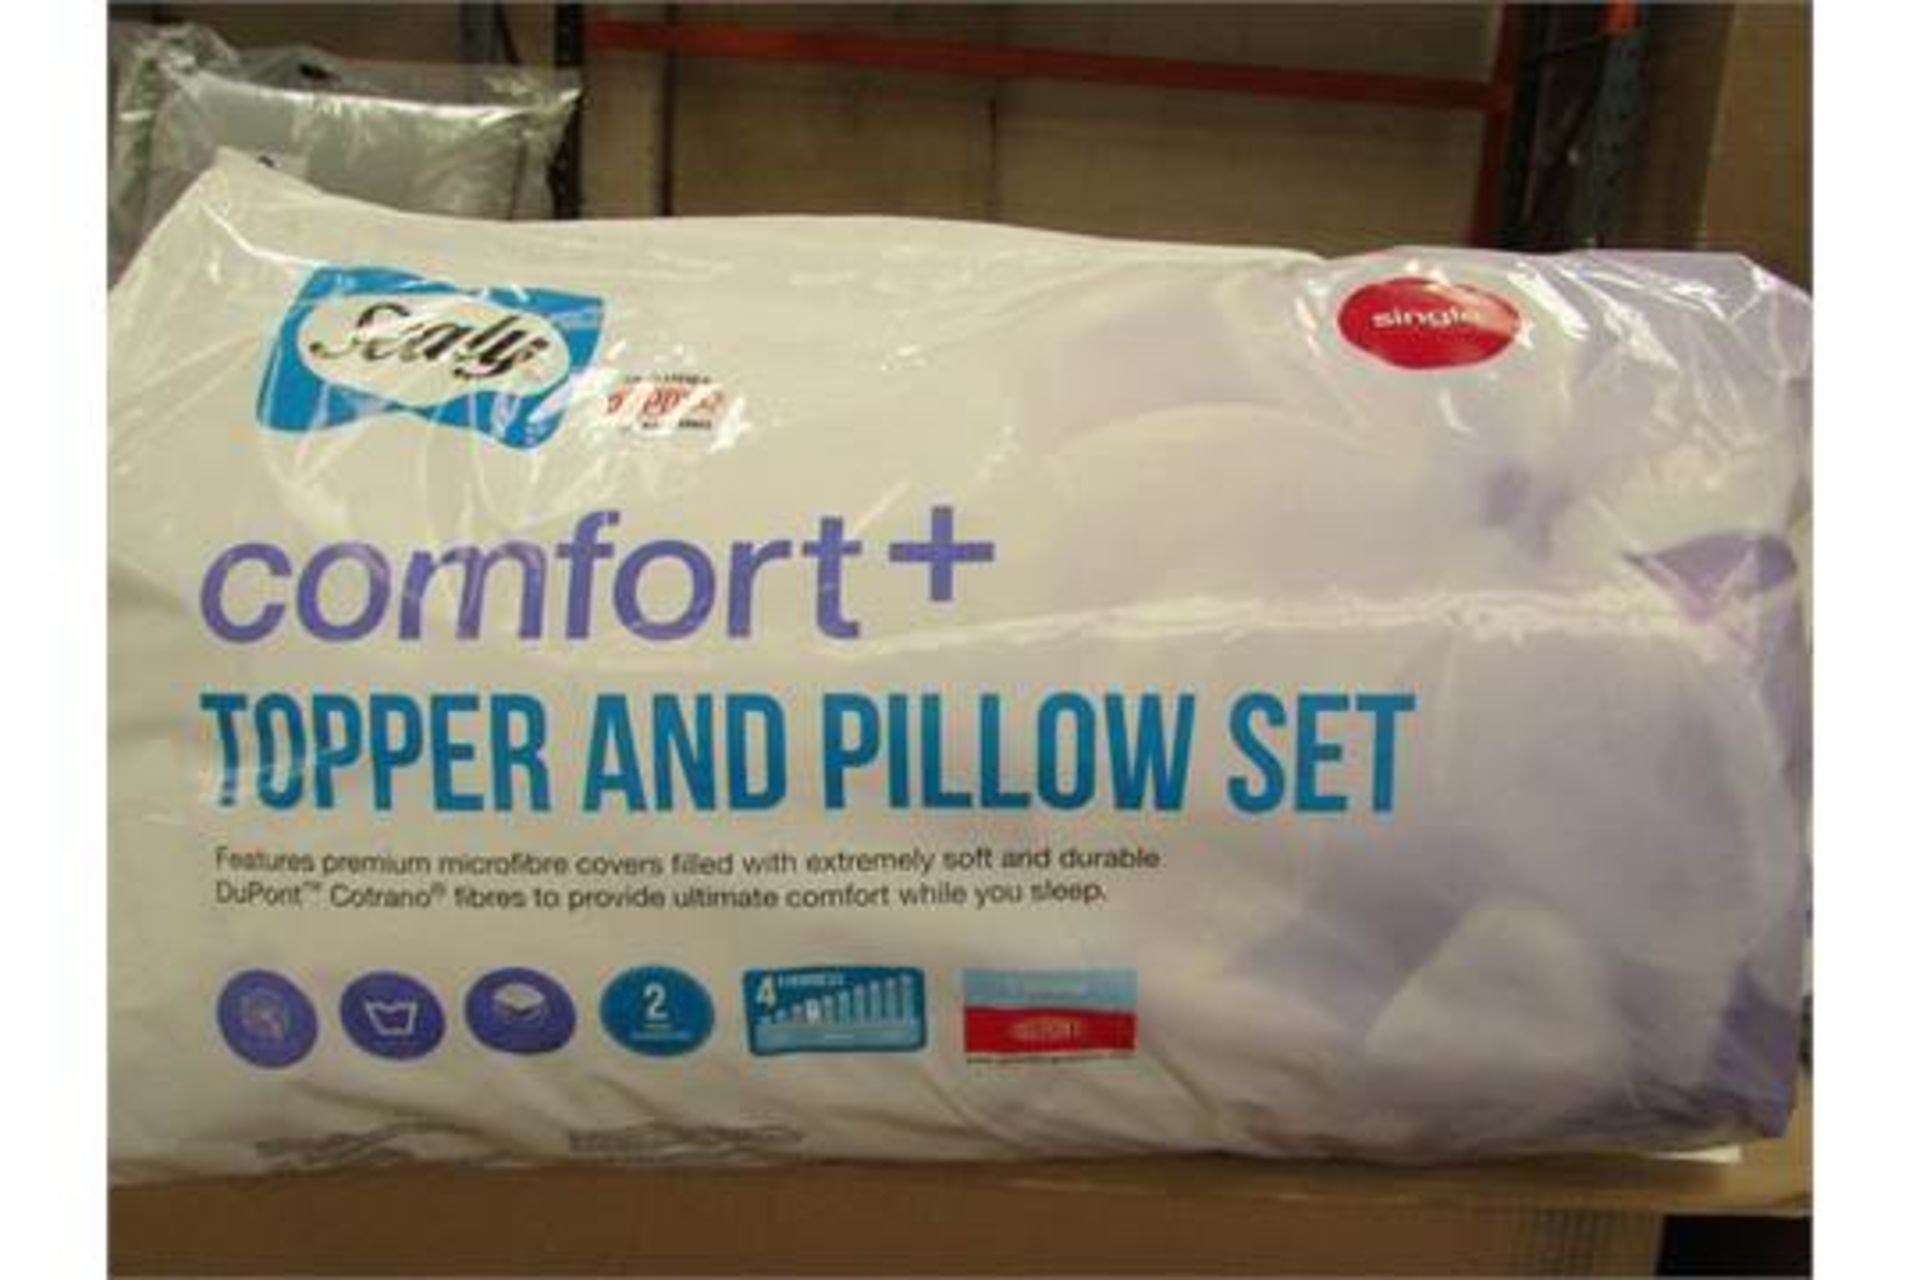 5x Sealy 'Comfort+' topper and pillow set, single size, new in packaging.